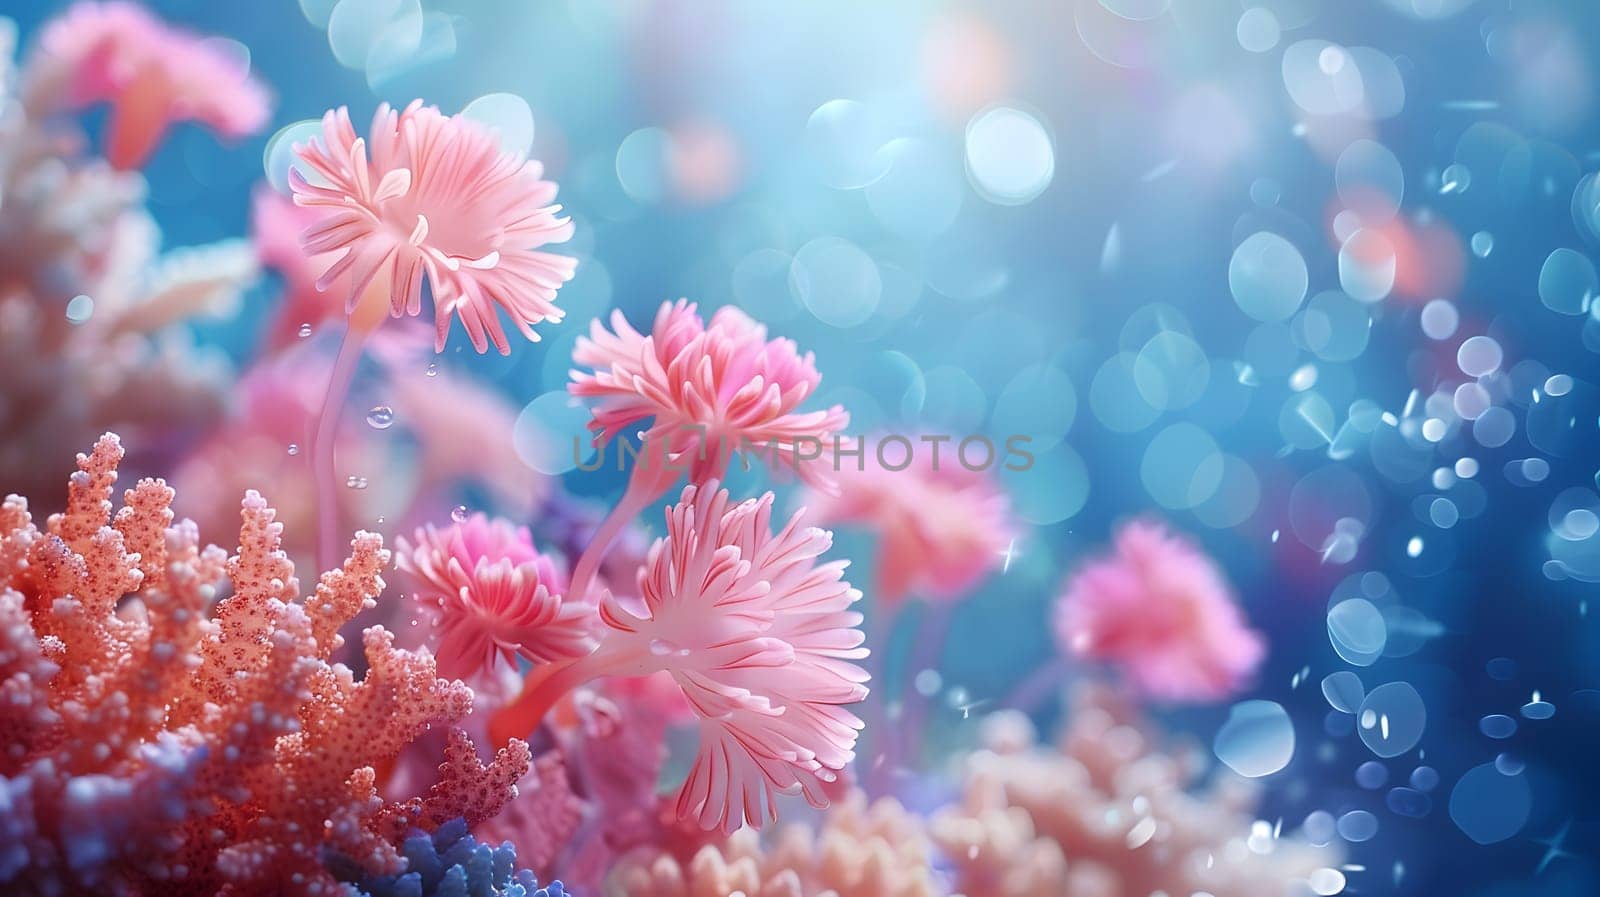 Electric blue coral is one of the many different types of corals found in the ocean, resembling a flowering plant in shades of magenta and blossoms in natural underwater landscapes